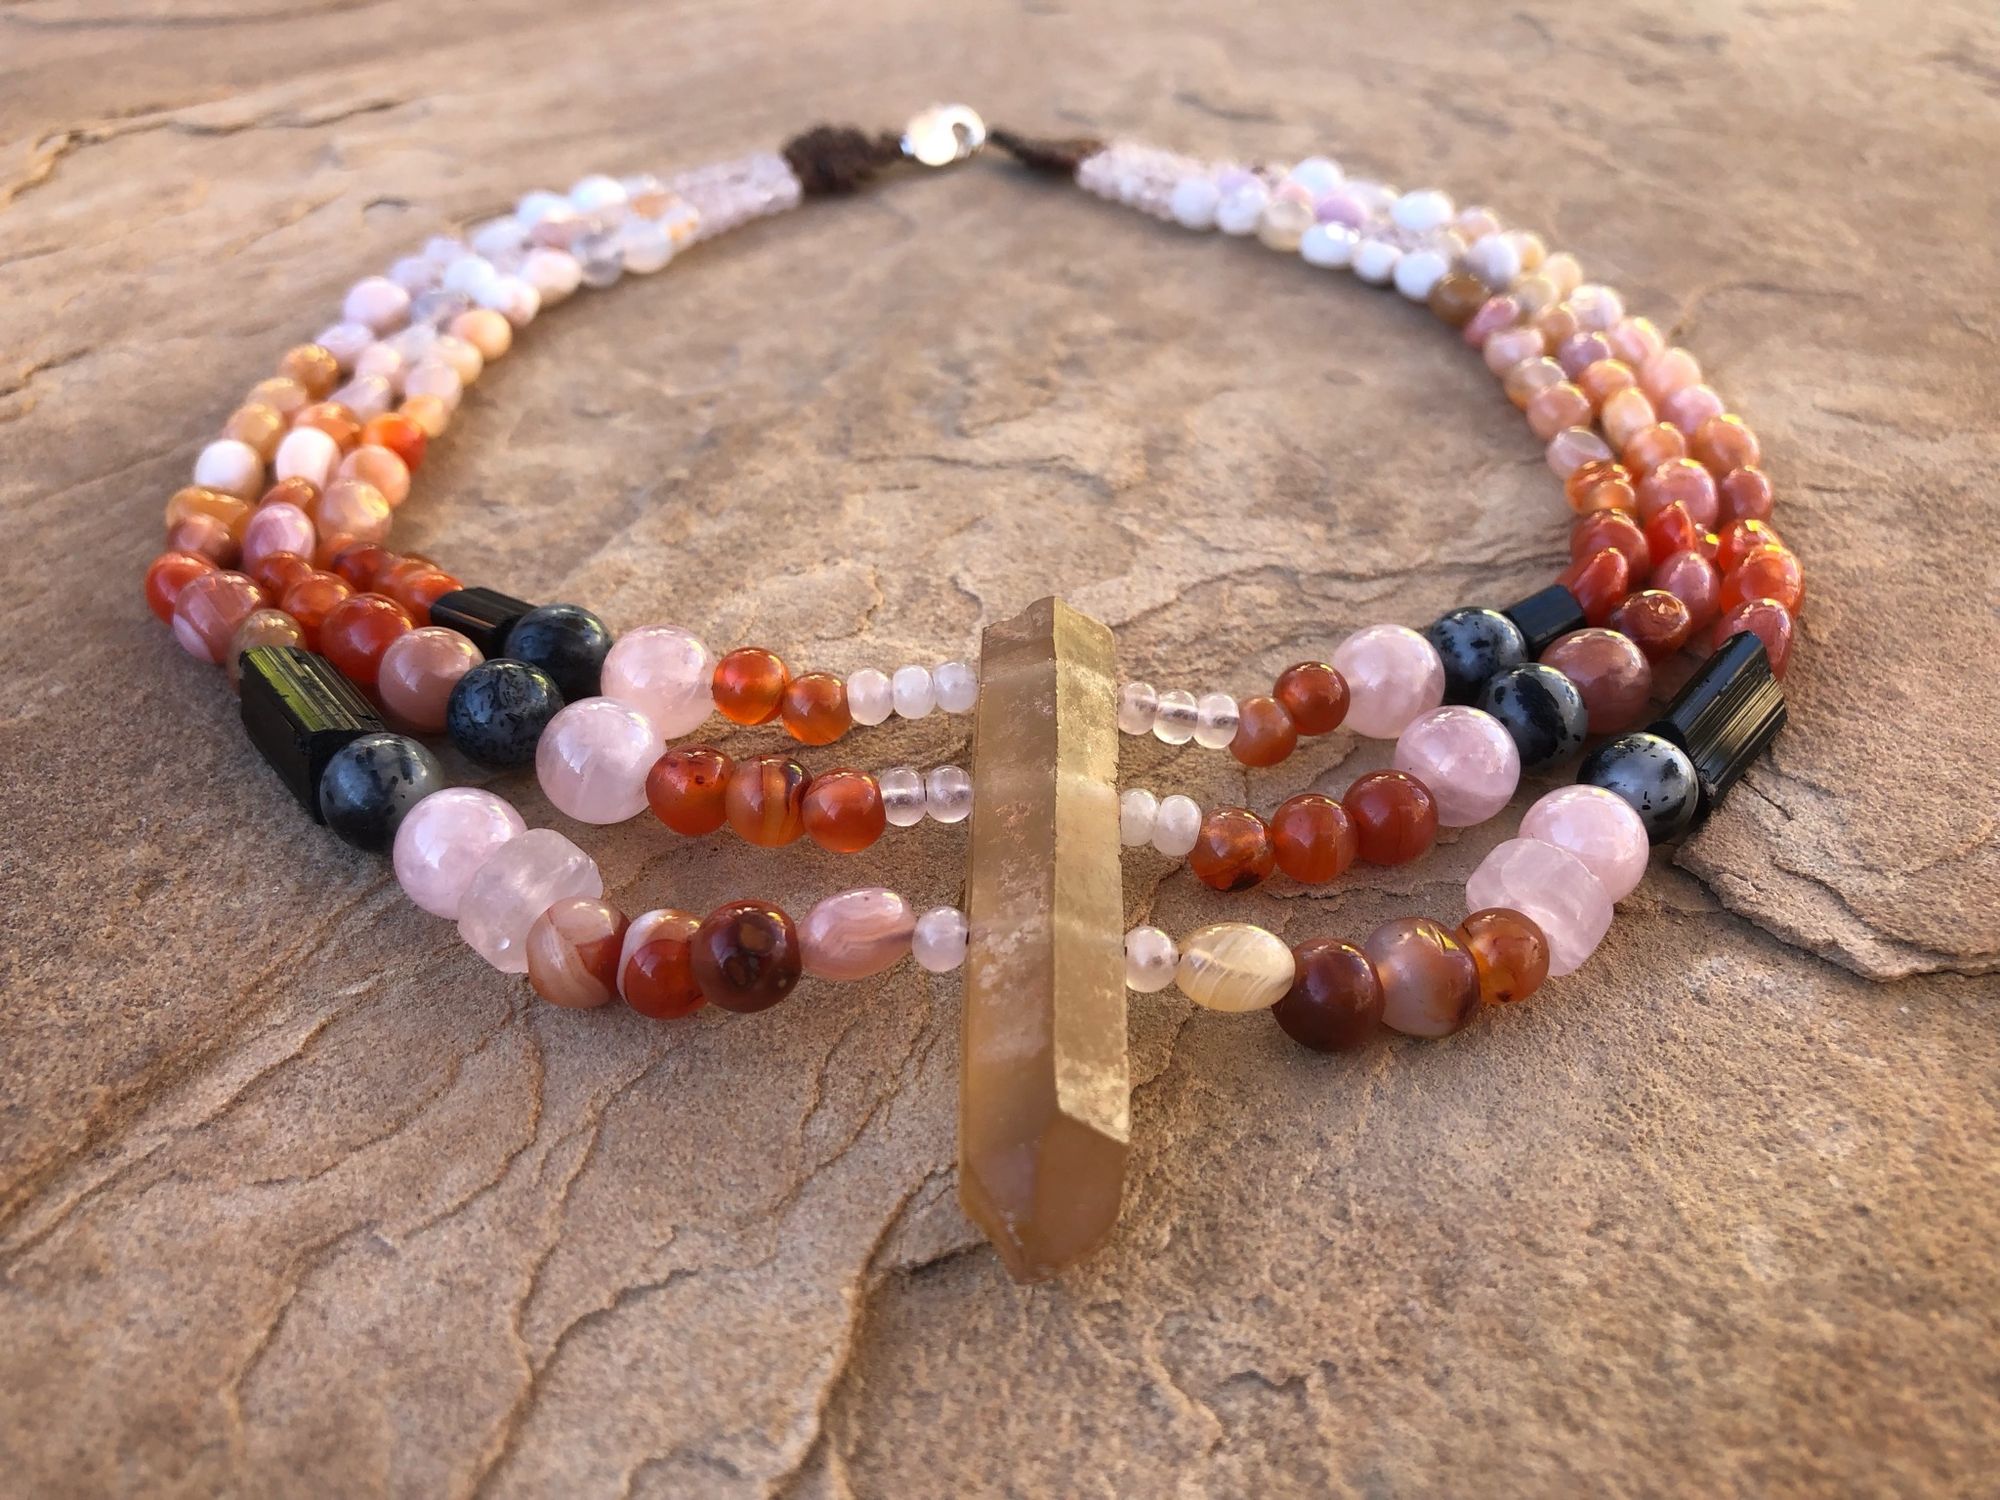 Necklace laying on tan sandstone that has citrine yellow-brown, rose quartz pink, black tourmaline and red agate beads